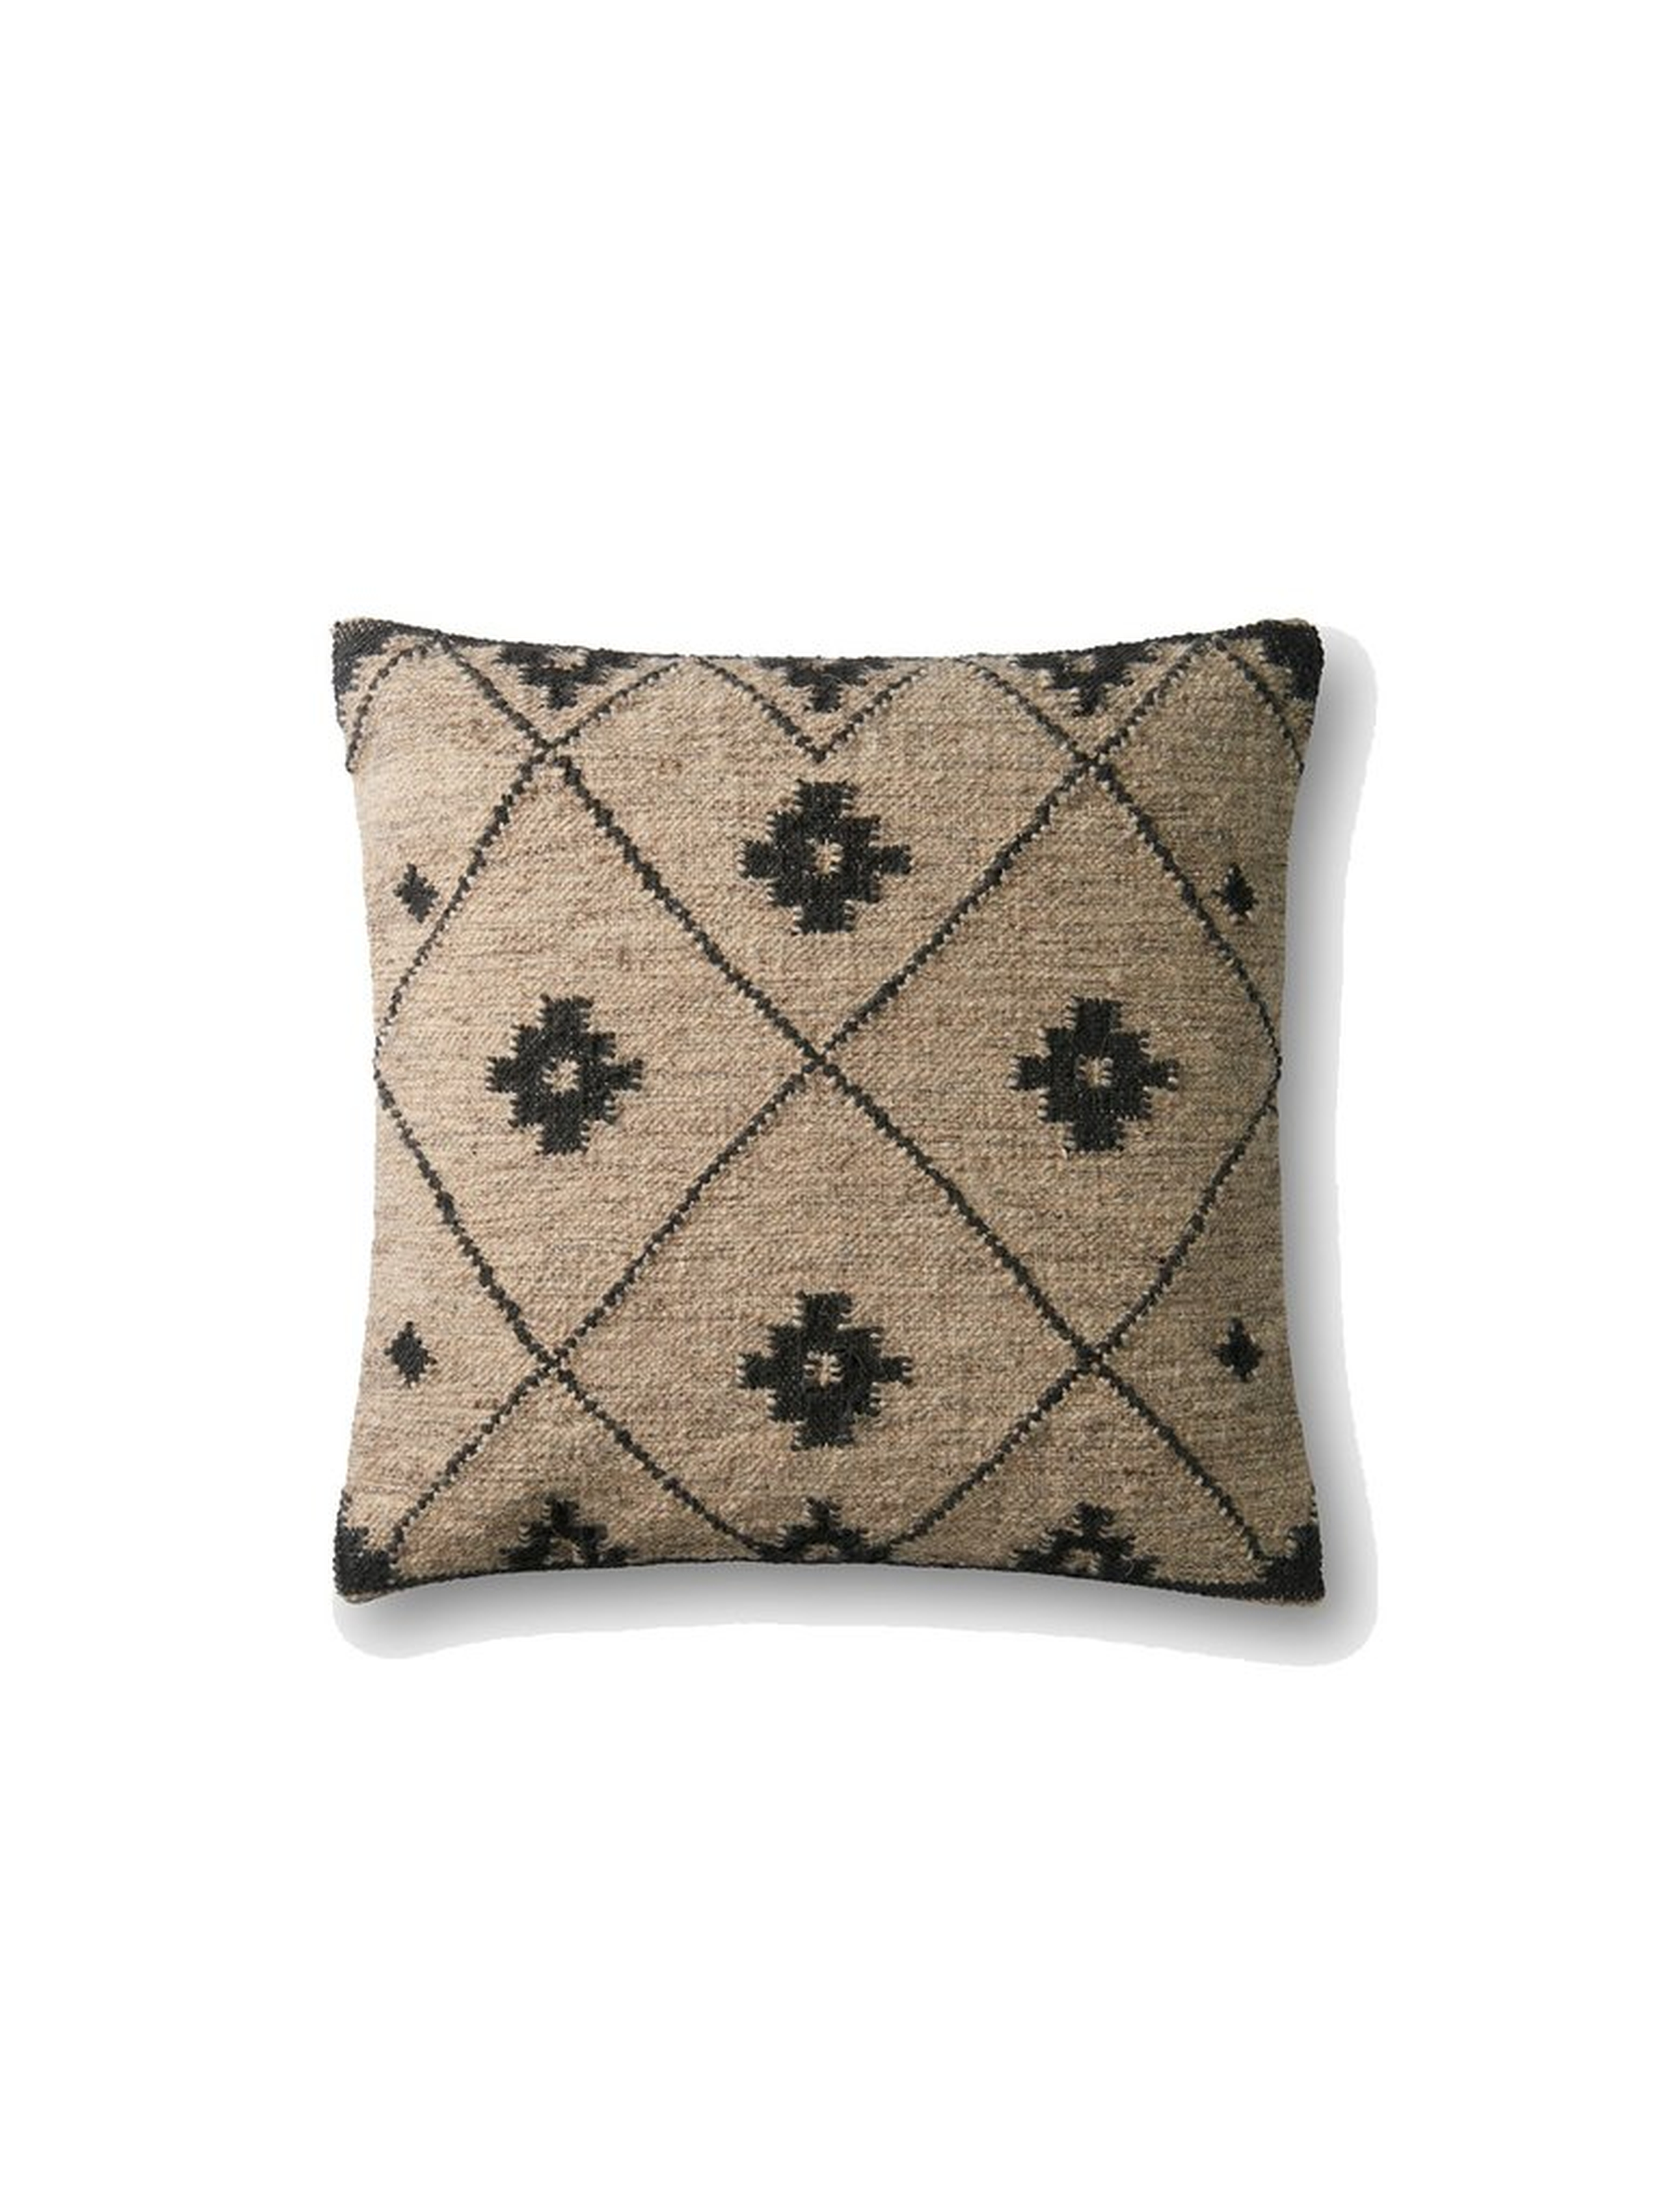 ED Ellen DeGeneres Crafted by Loloi Pillows P4016 Beige / Black 22" x 22" Cover w/Down - Loloi Rugs